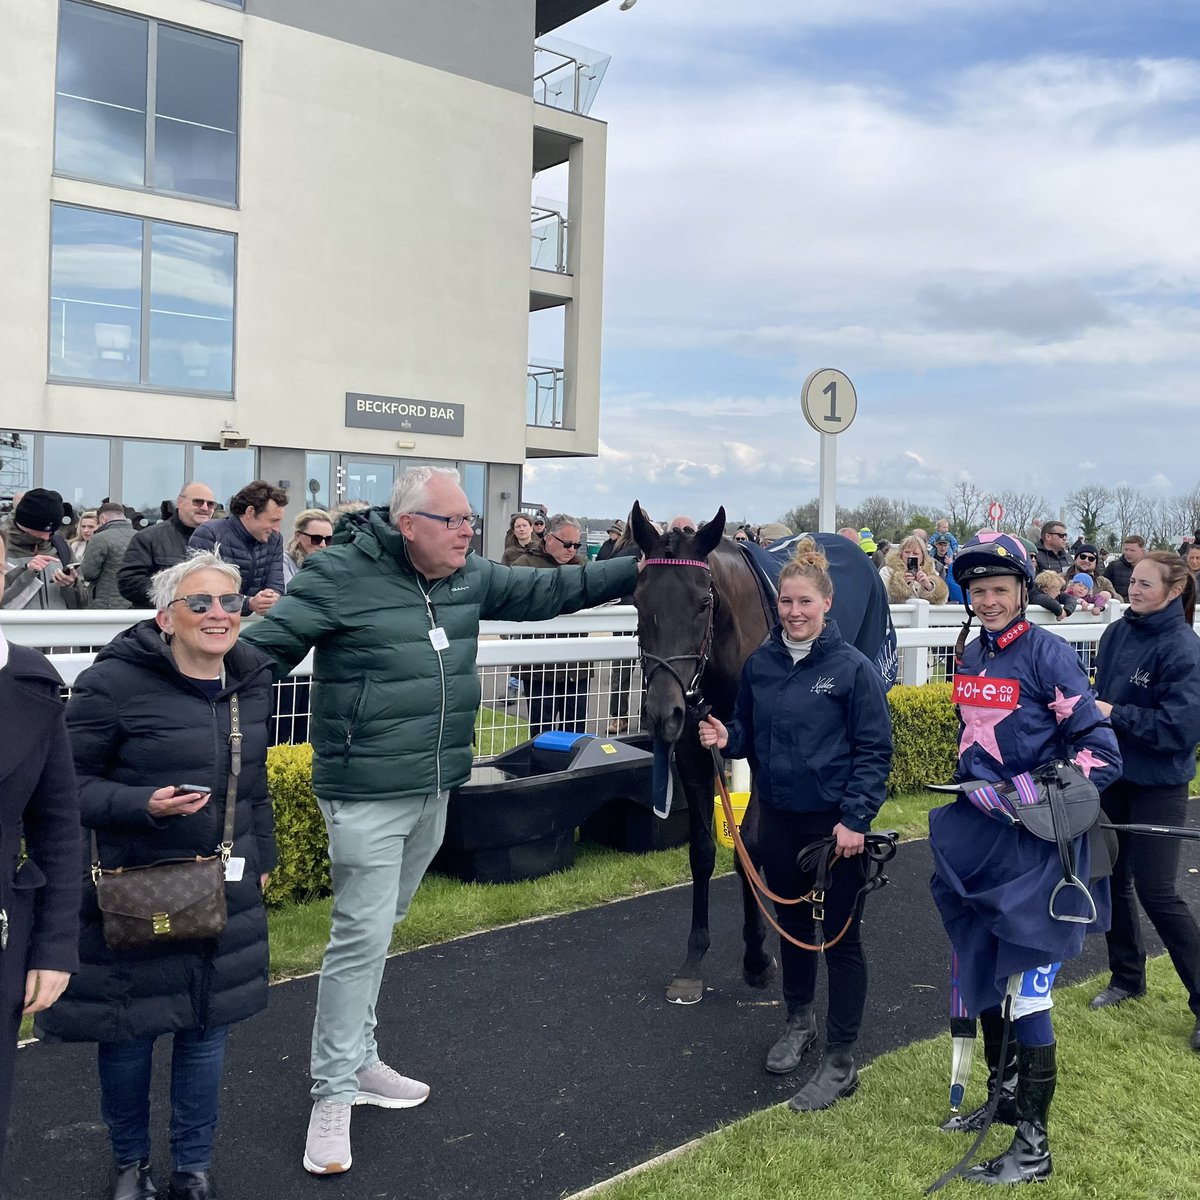 Ciara Pearl lands the hat-trick! Top work from the team as @DontTellClaire filly maintains her perfect record. @davidprobert9 in the irons @BathRacecourse Purchased @Tattersalls1766 from @whattonmanor her record is 4 wins and 2 seconds from 6 starts.